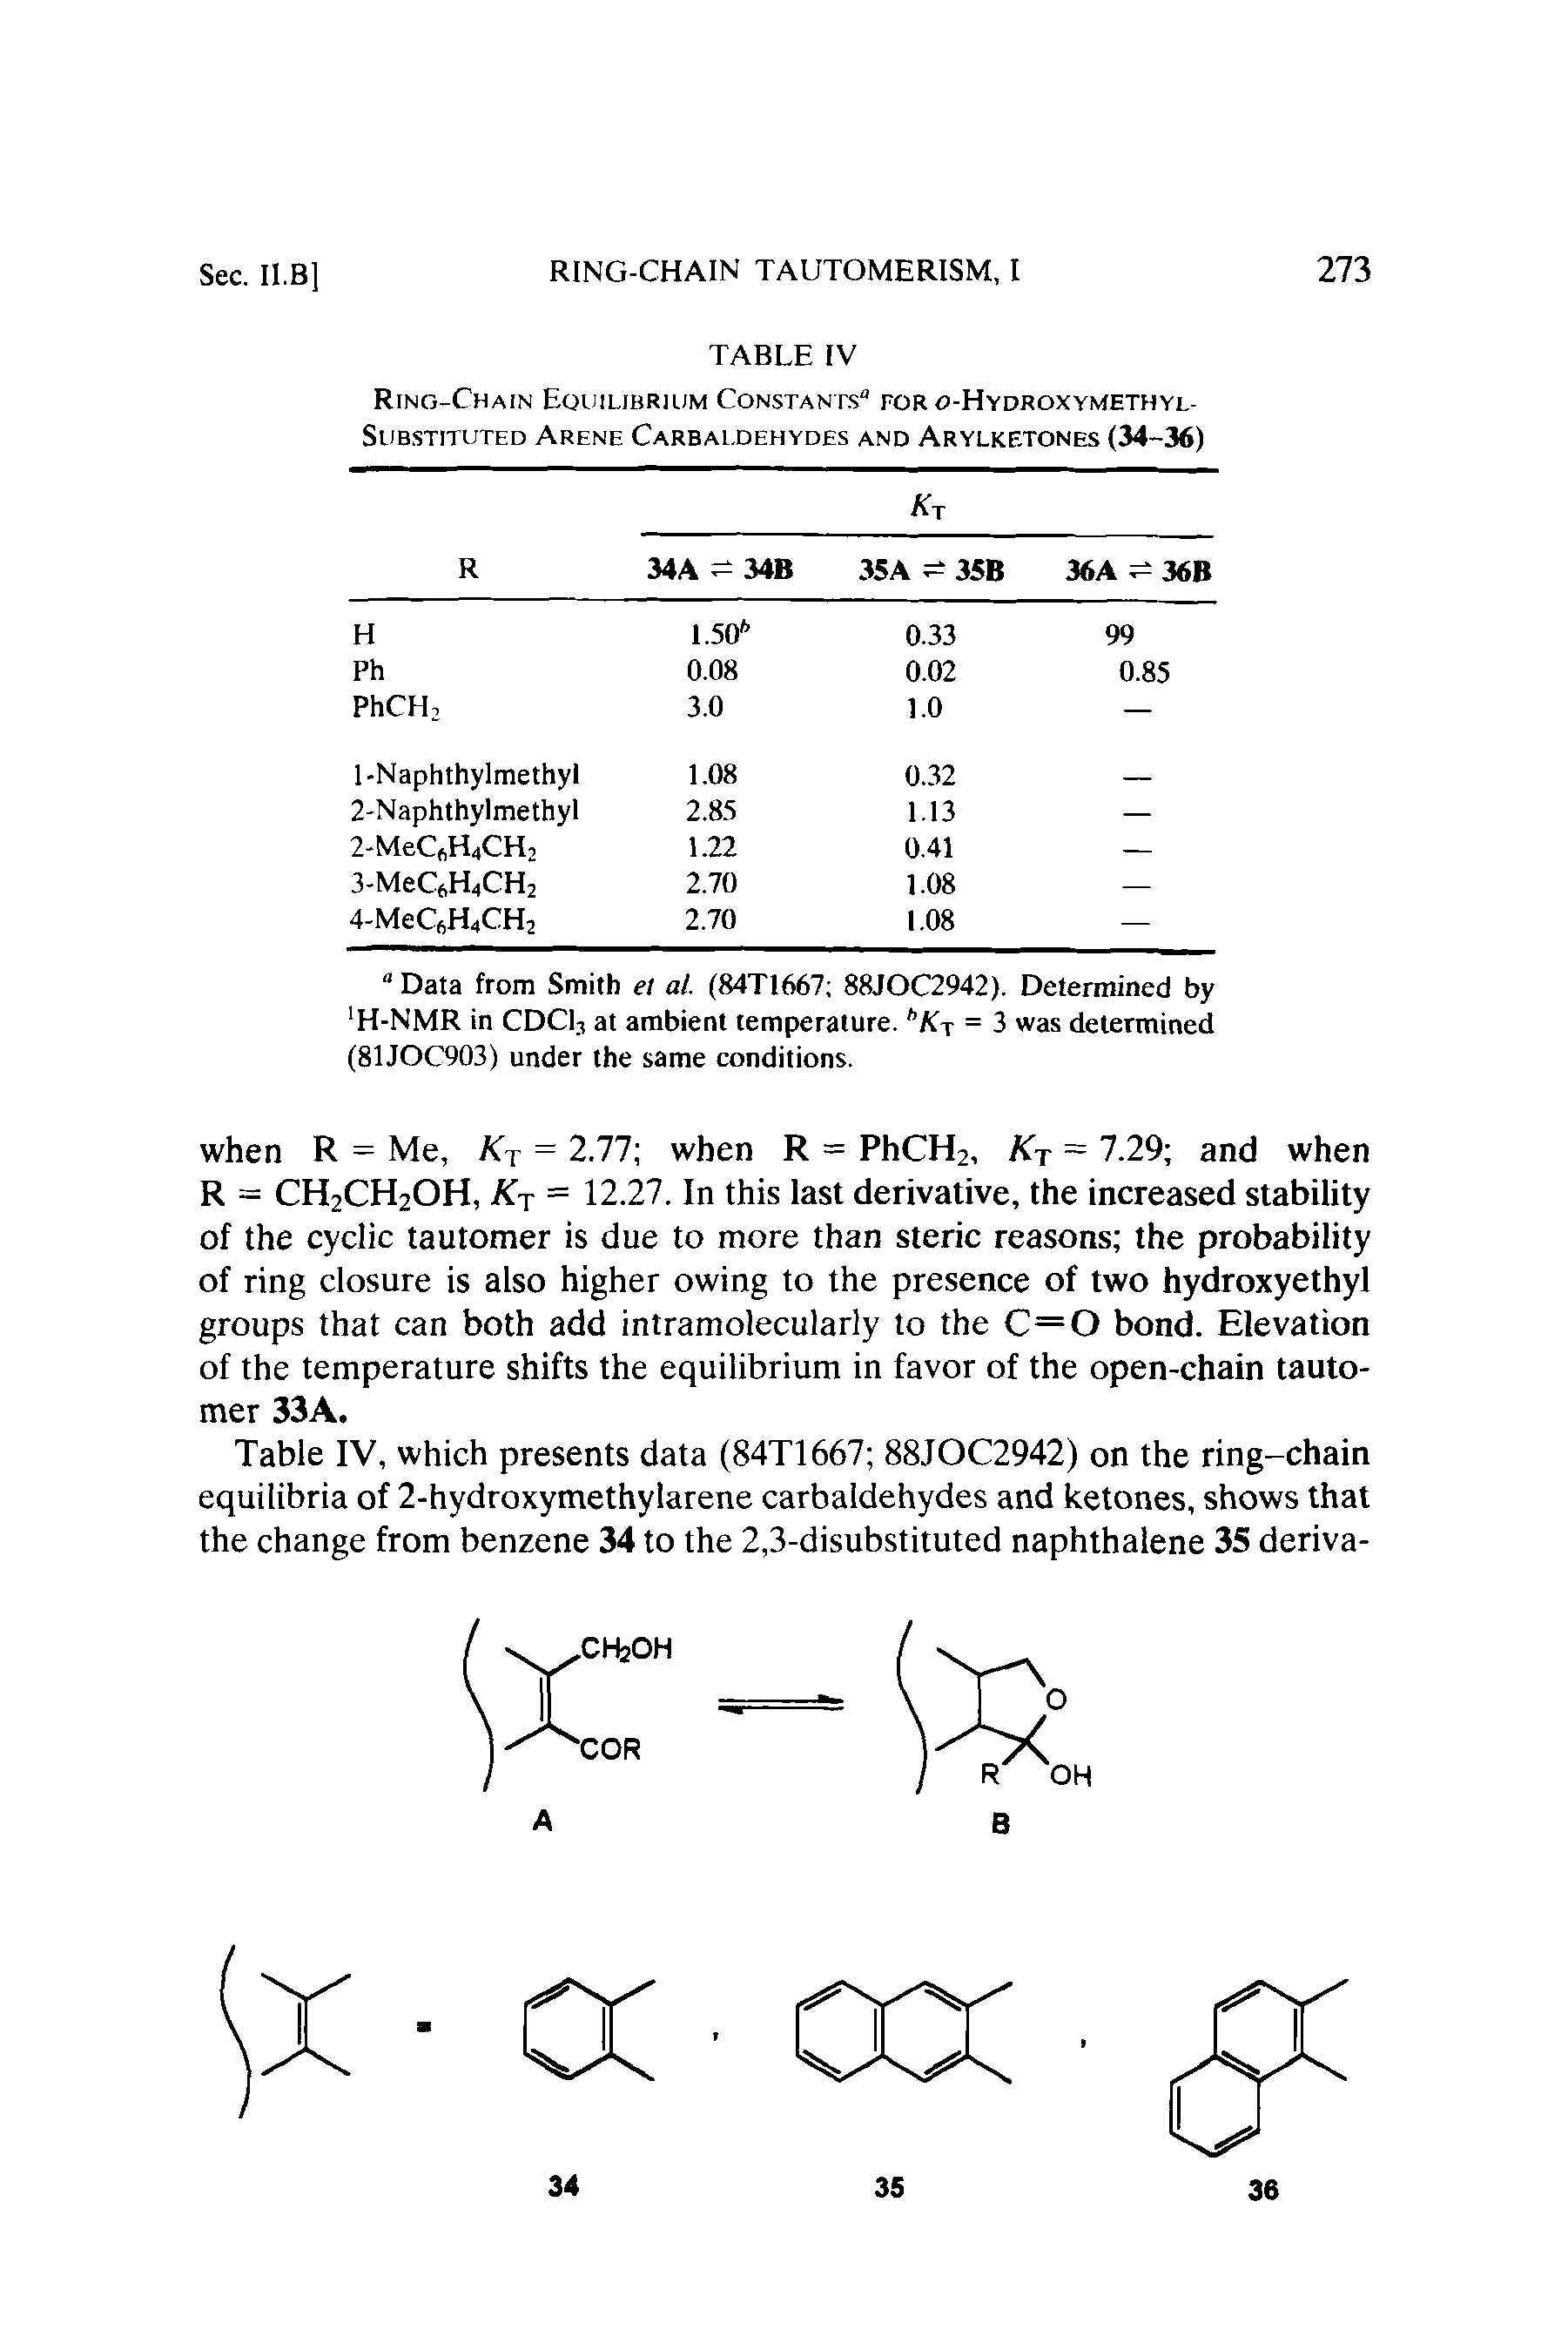 Table IV, which presents data (84T1667 88JOC2942) on the ring-chain equilibria of 2-hydroxymethyIarene carbaldehydes and ketones, shows that the change from benzene 34 to the 2,3-disubstituted naphthalene 35 deriva-...